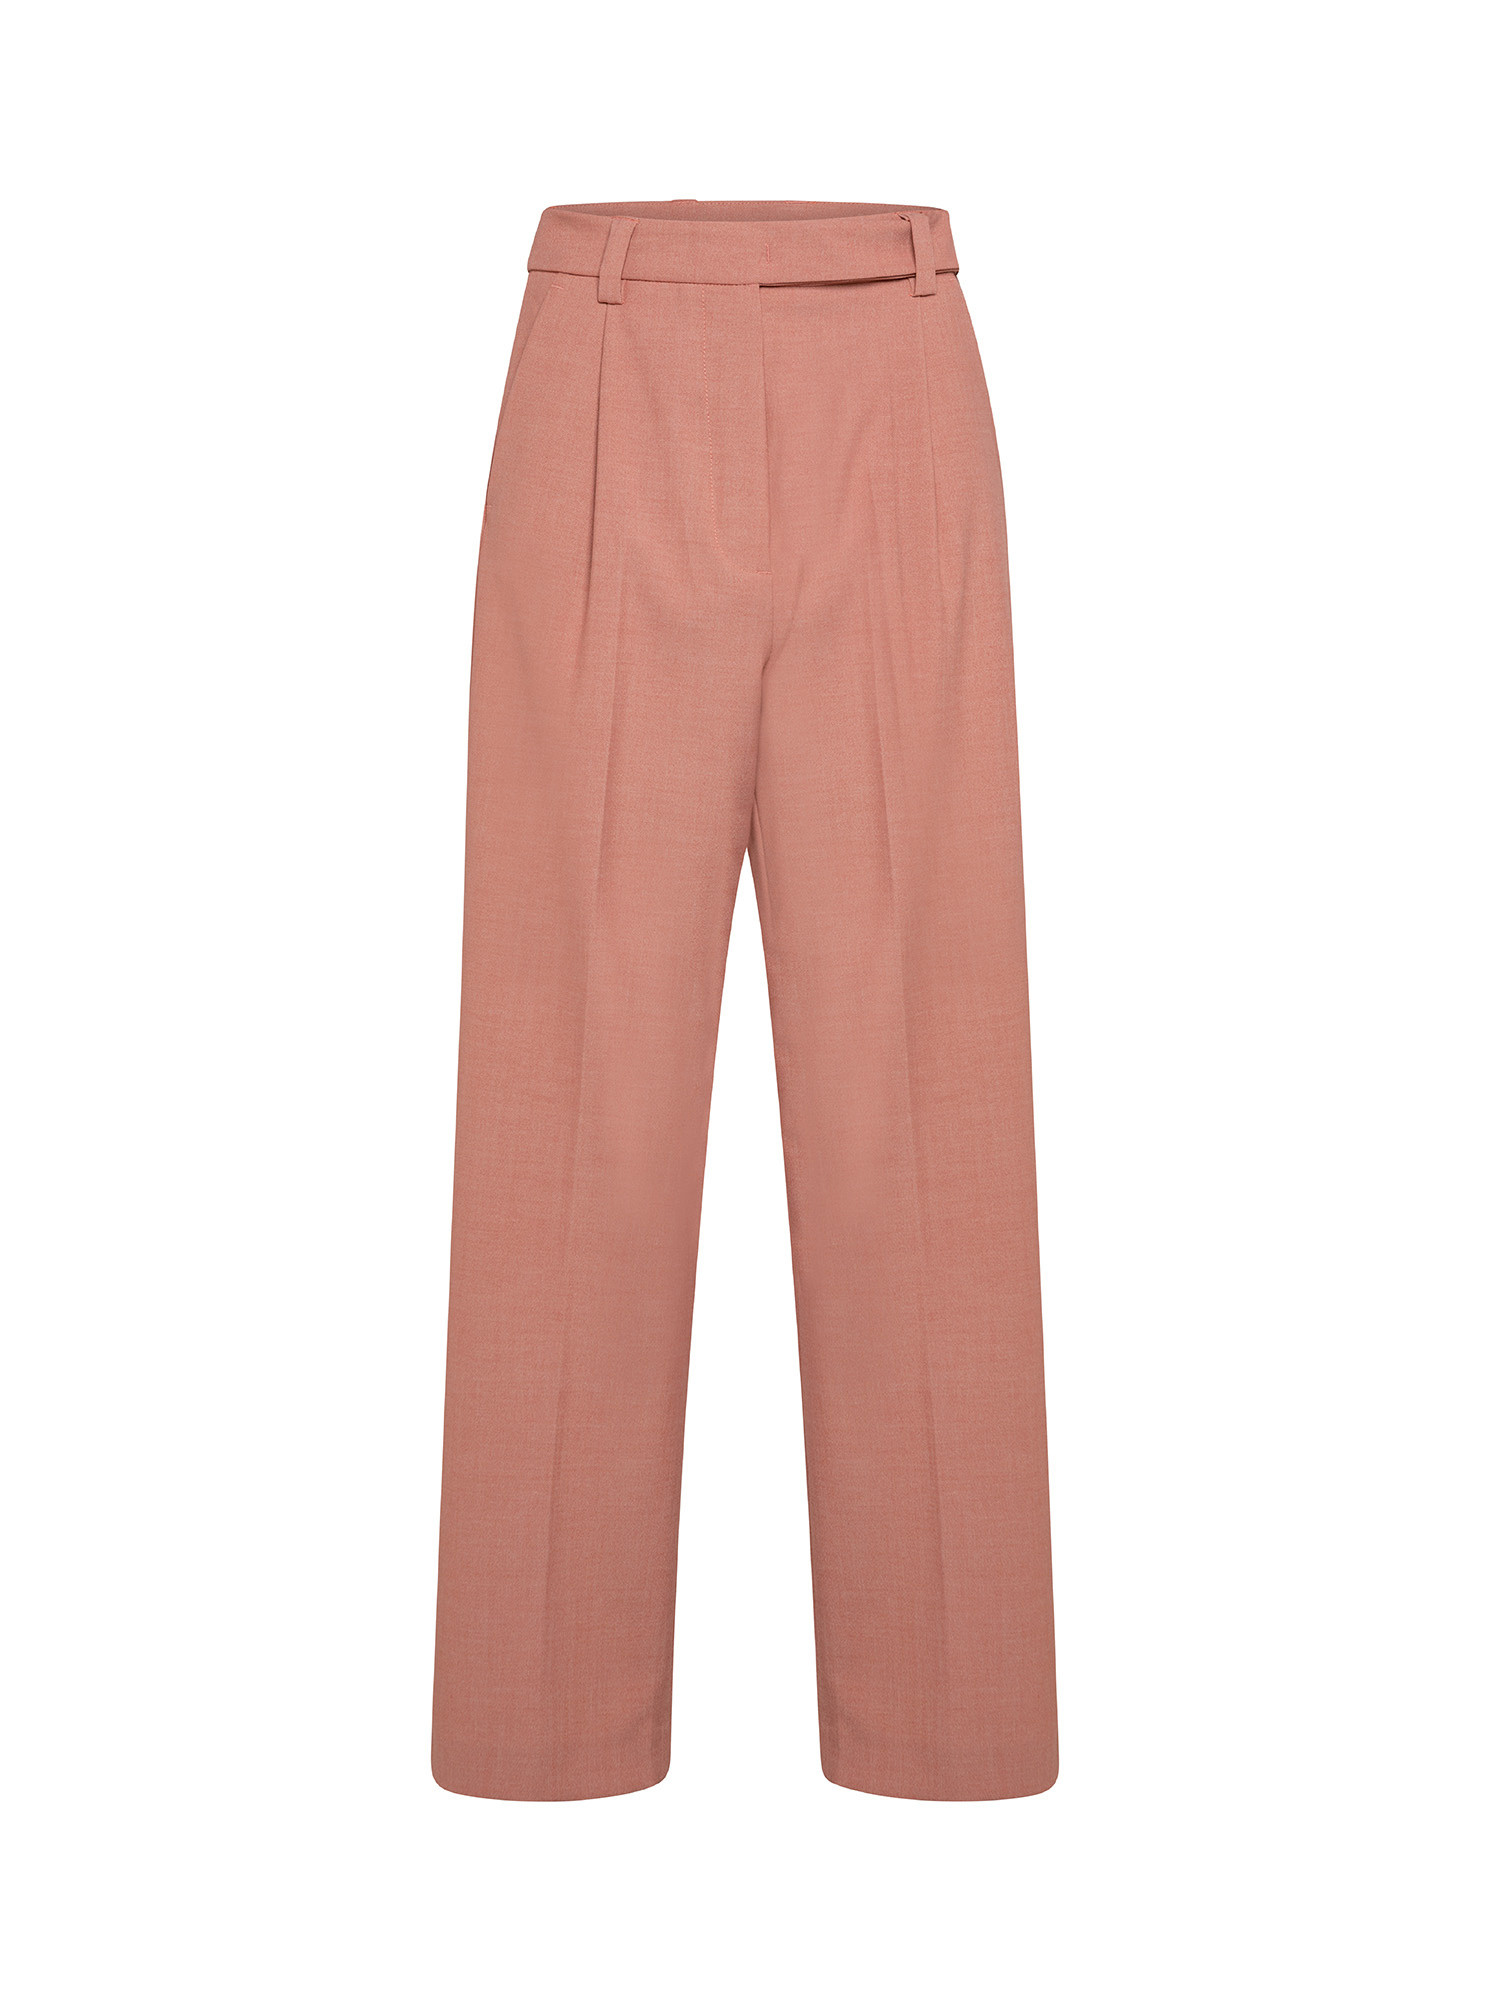 Multicolor pied de poule trousers in polyester-viscose blend with wide leg, Pink, large image number 0